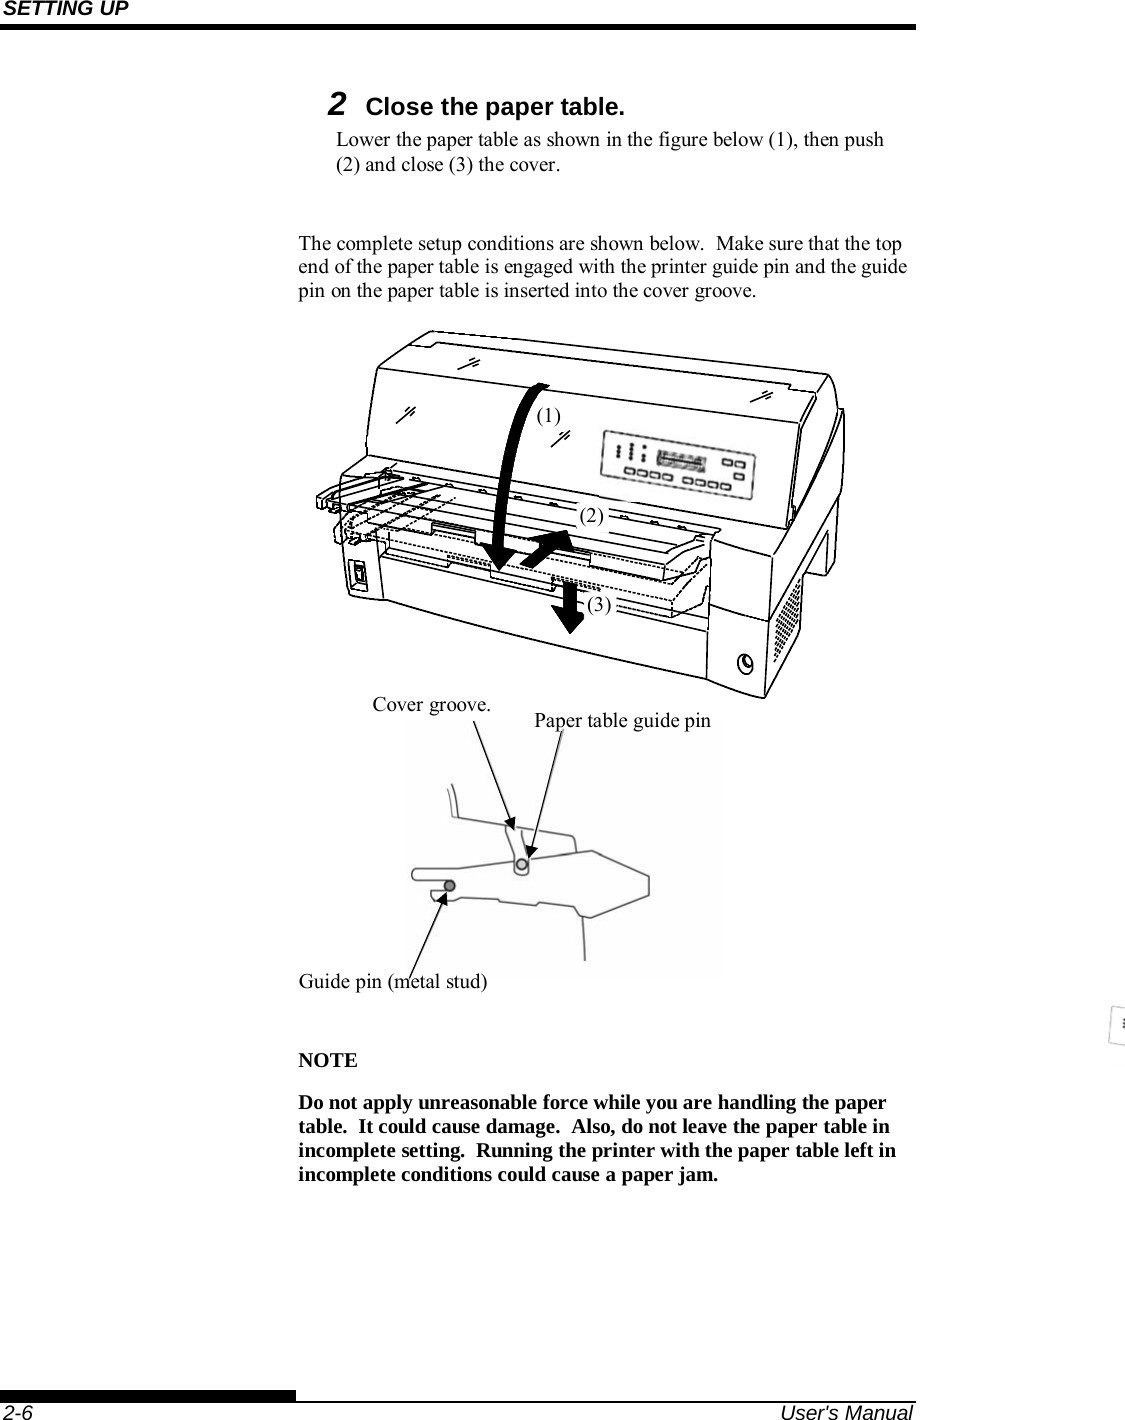 SETTING UP    2-6  User&apos;s Manual 2 Close the paper table. Lower the paper table as shown in the figure below (1), then push (2) and close (3) the cover.  The complete setup conditions are shown below.  Make sure that the top end of the paper table is engaged with the printer guide pin and the guide pin on the paper table is inserted into the cover groove.                  NOTE Do not apply unreasonable force while you are handling the paper table.  It could cause damage.  Also, do not leave the paper table in incomplete setting.  Running the printer with the paper table left in incomplete conditions could cause a paper jam.  Cover groove.  Paper table guide pin Guide pin (metal stud) (3)(2)(1)